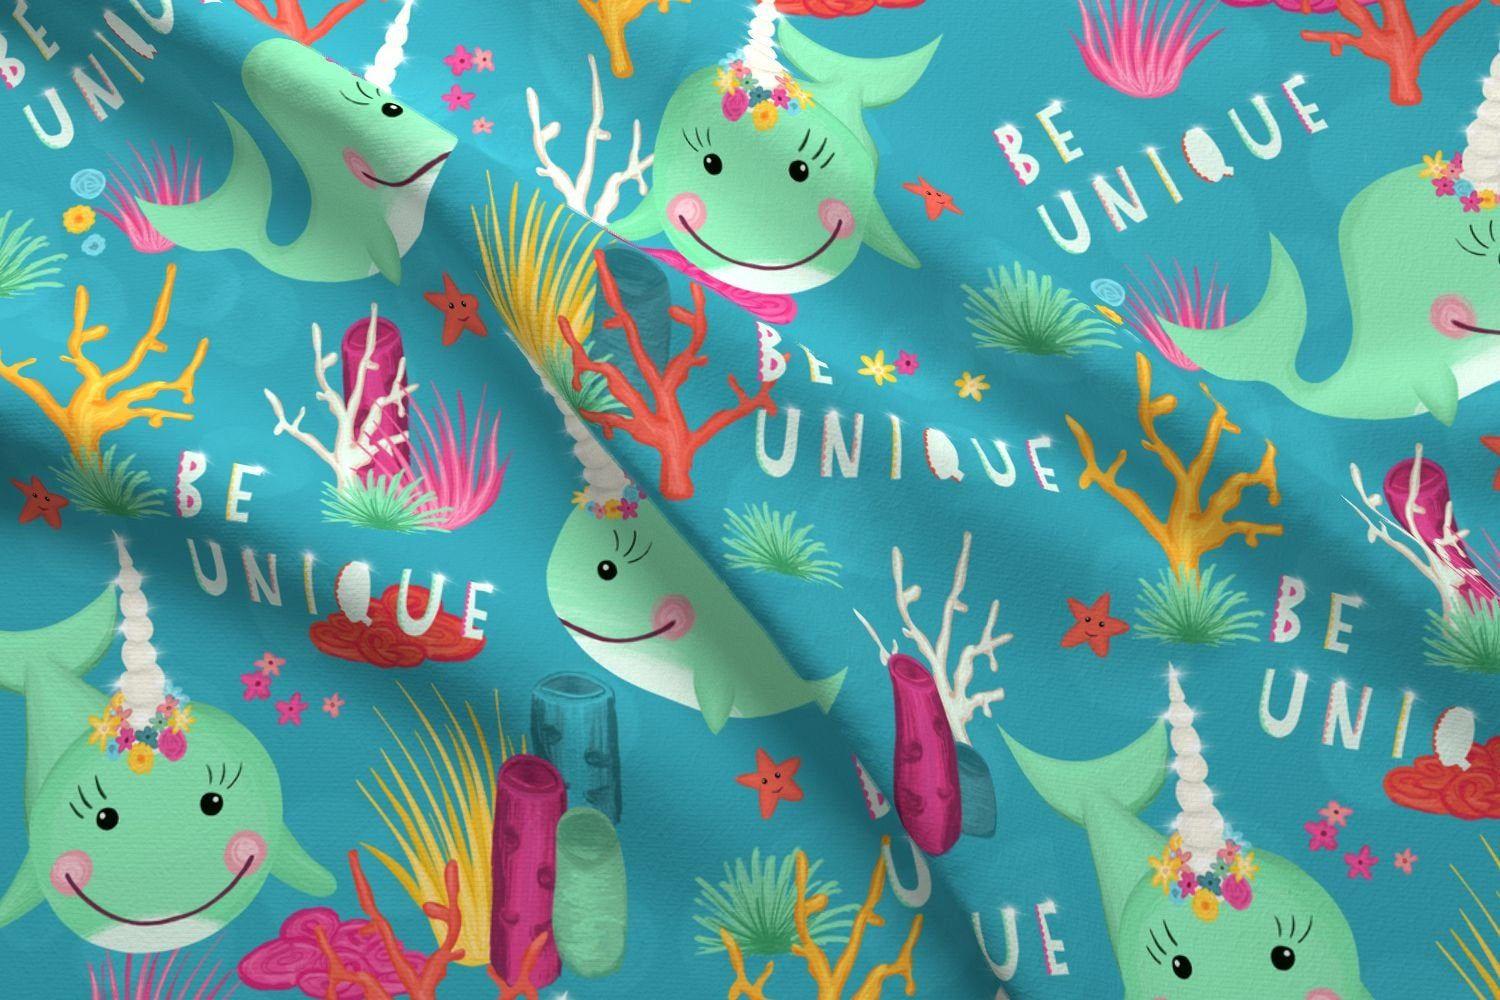 Affirmation Blue Narwhal Fabric Narwhal Be Unique By Sandra